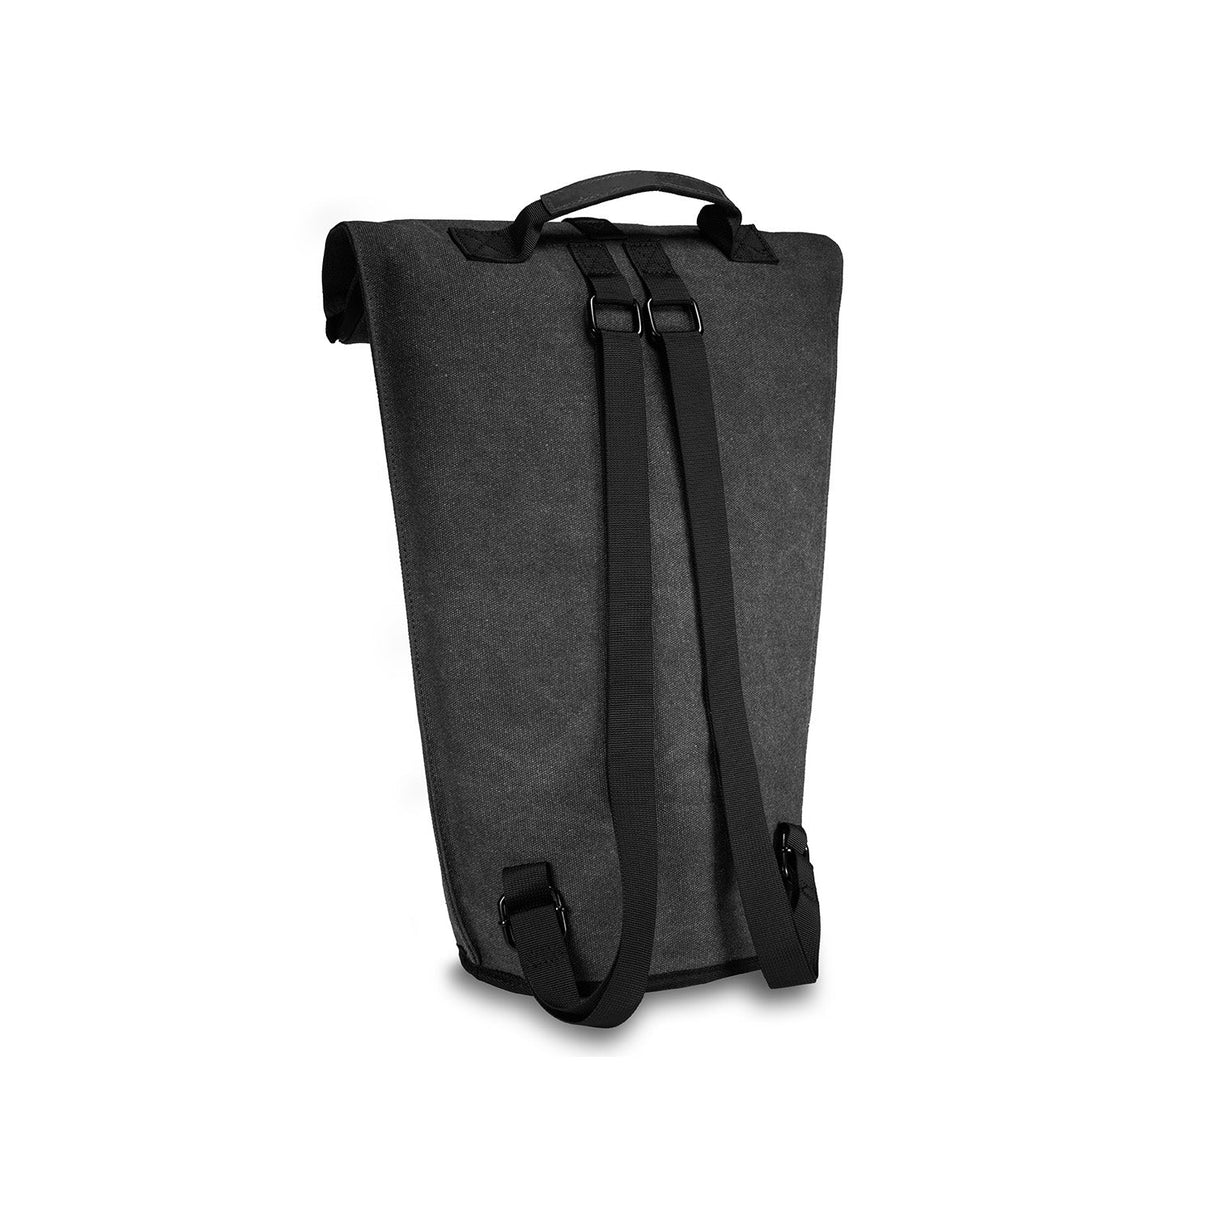 Revelry Supply 'The Defender' Smell Proof Padded Backpack in Black - Front View